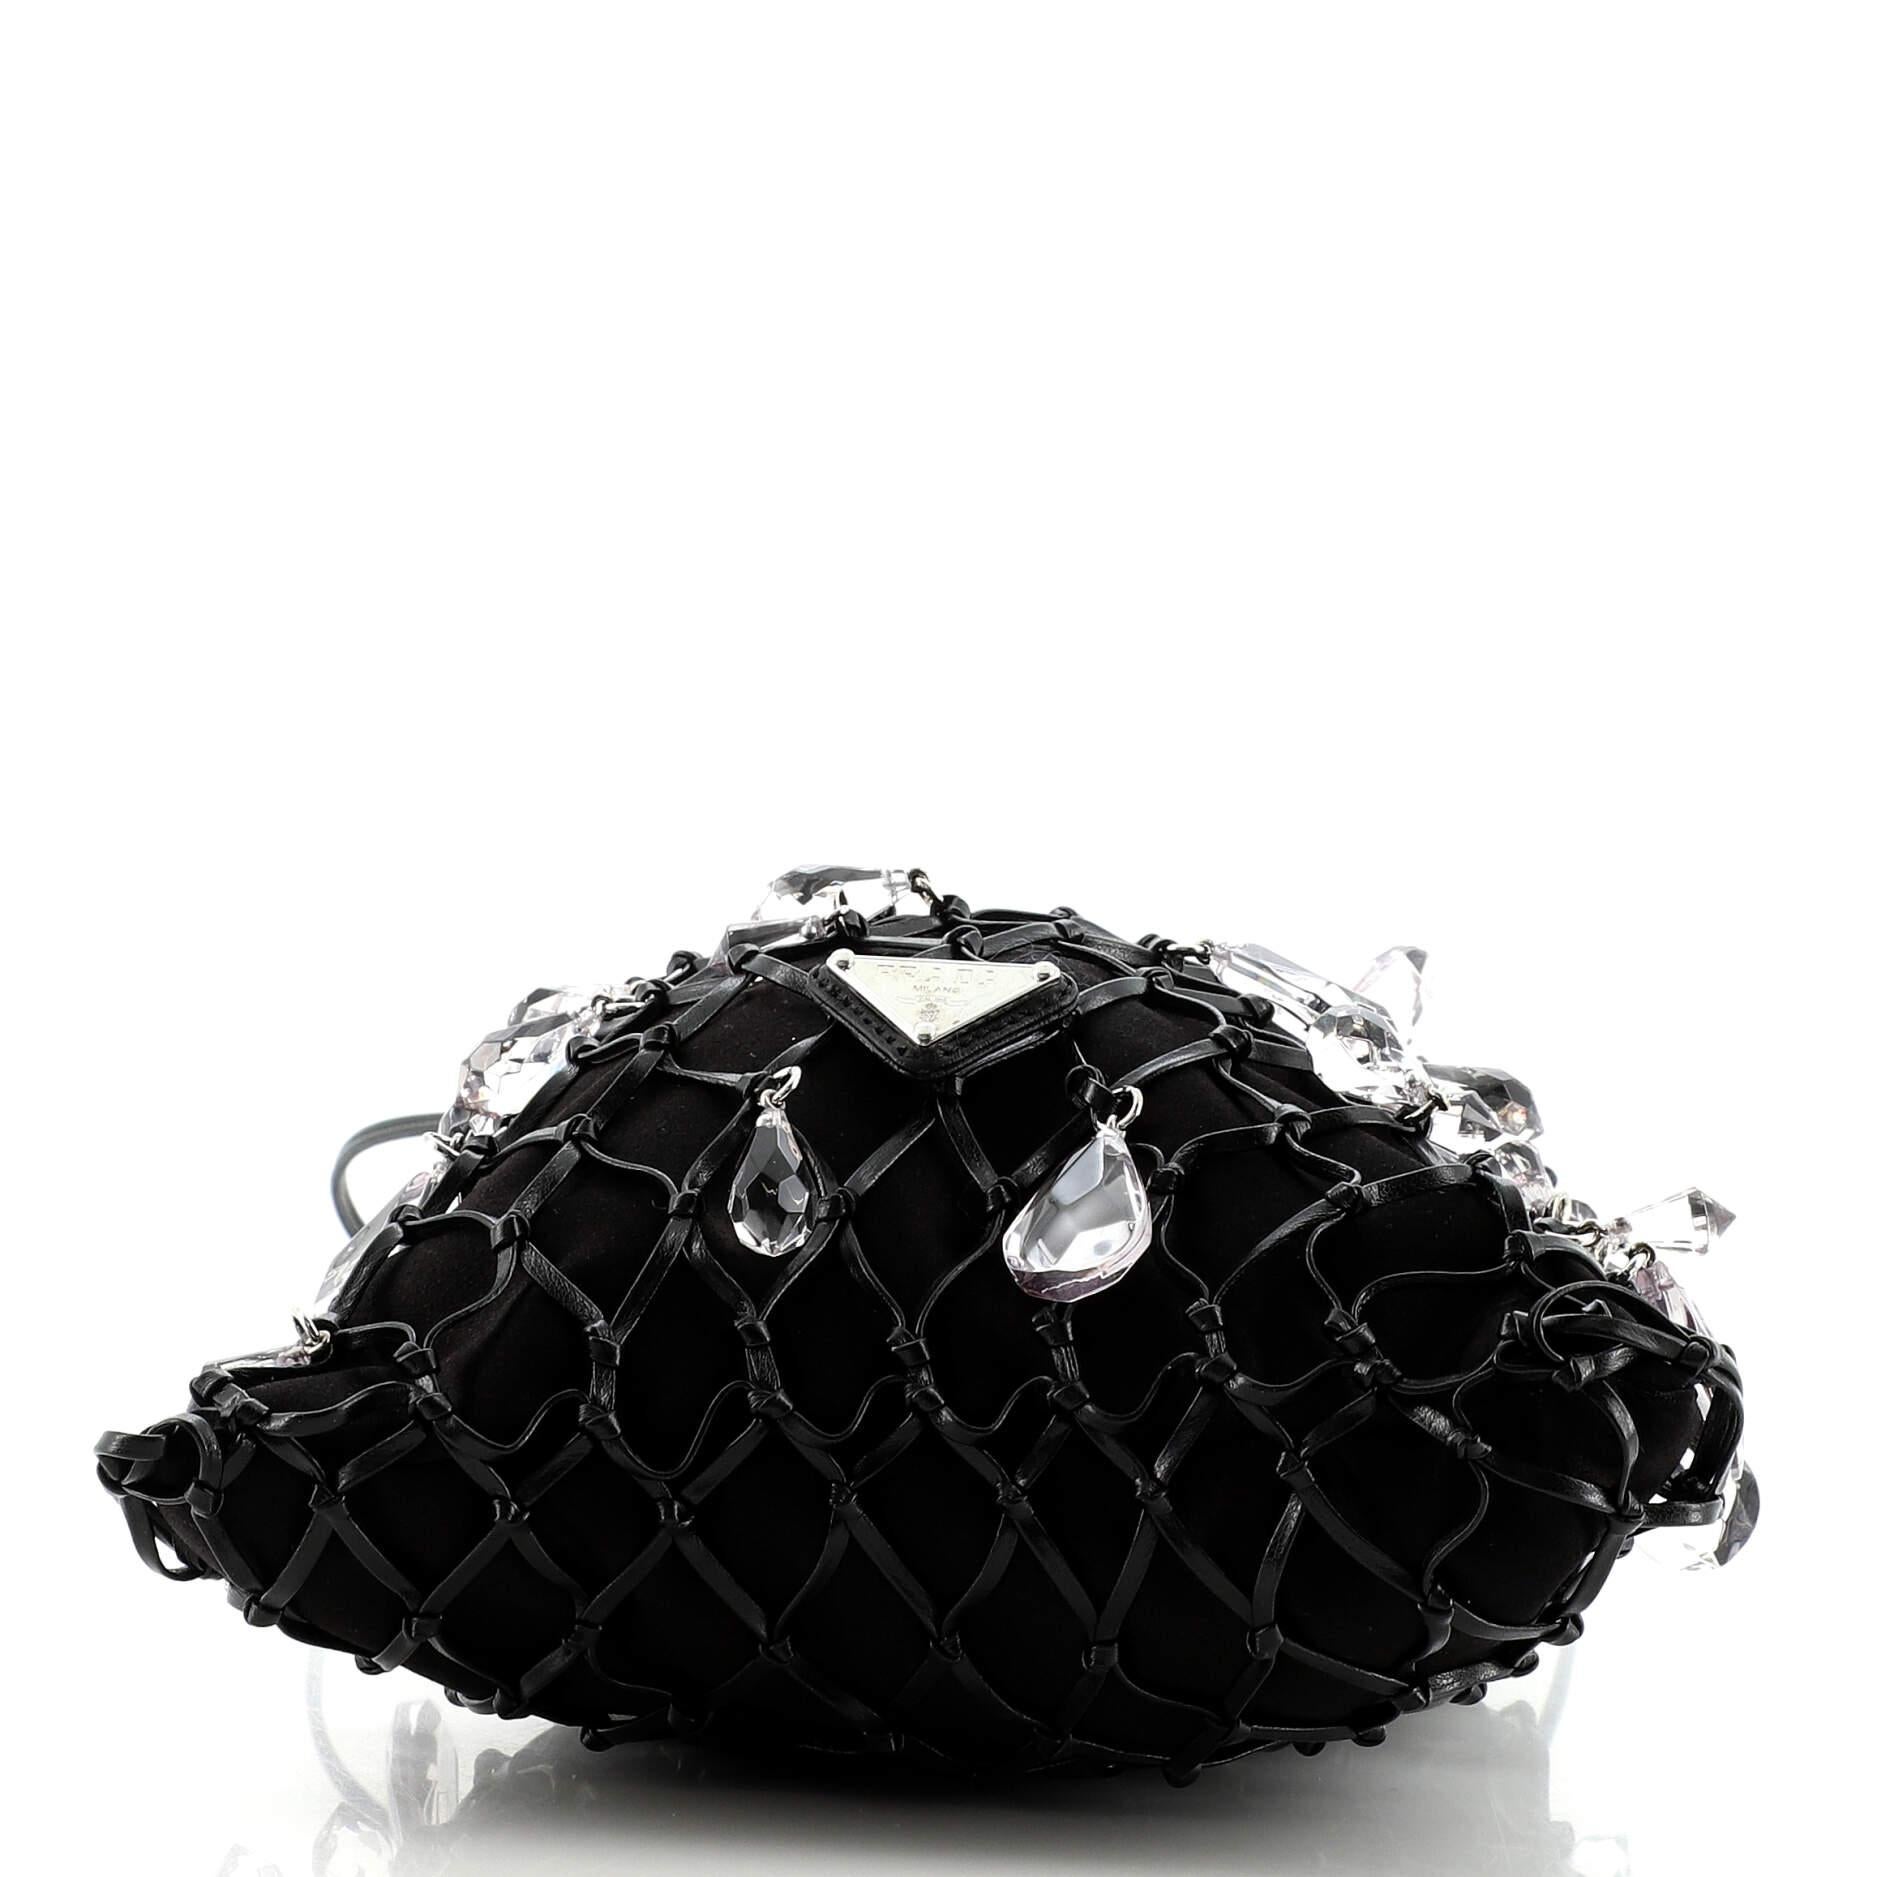 Black Prada Fishnet Chain Crossbody Bag Woven Leather and Satin with Crystals